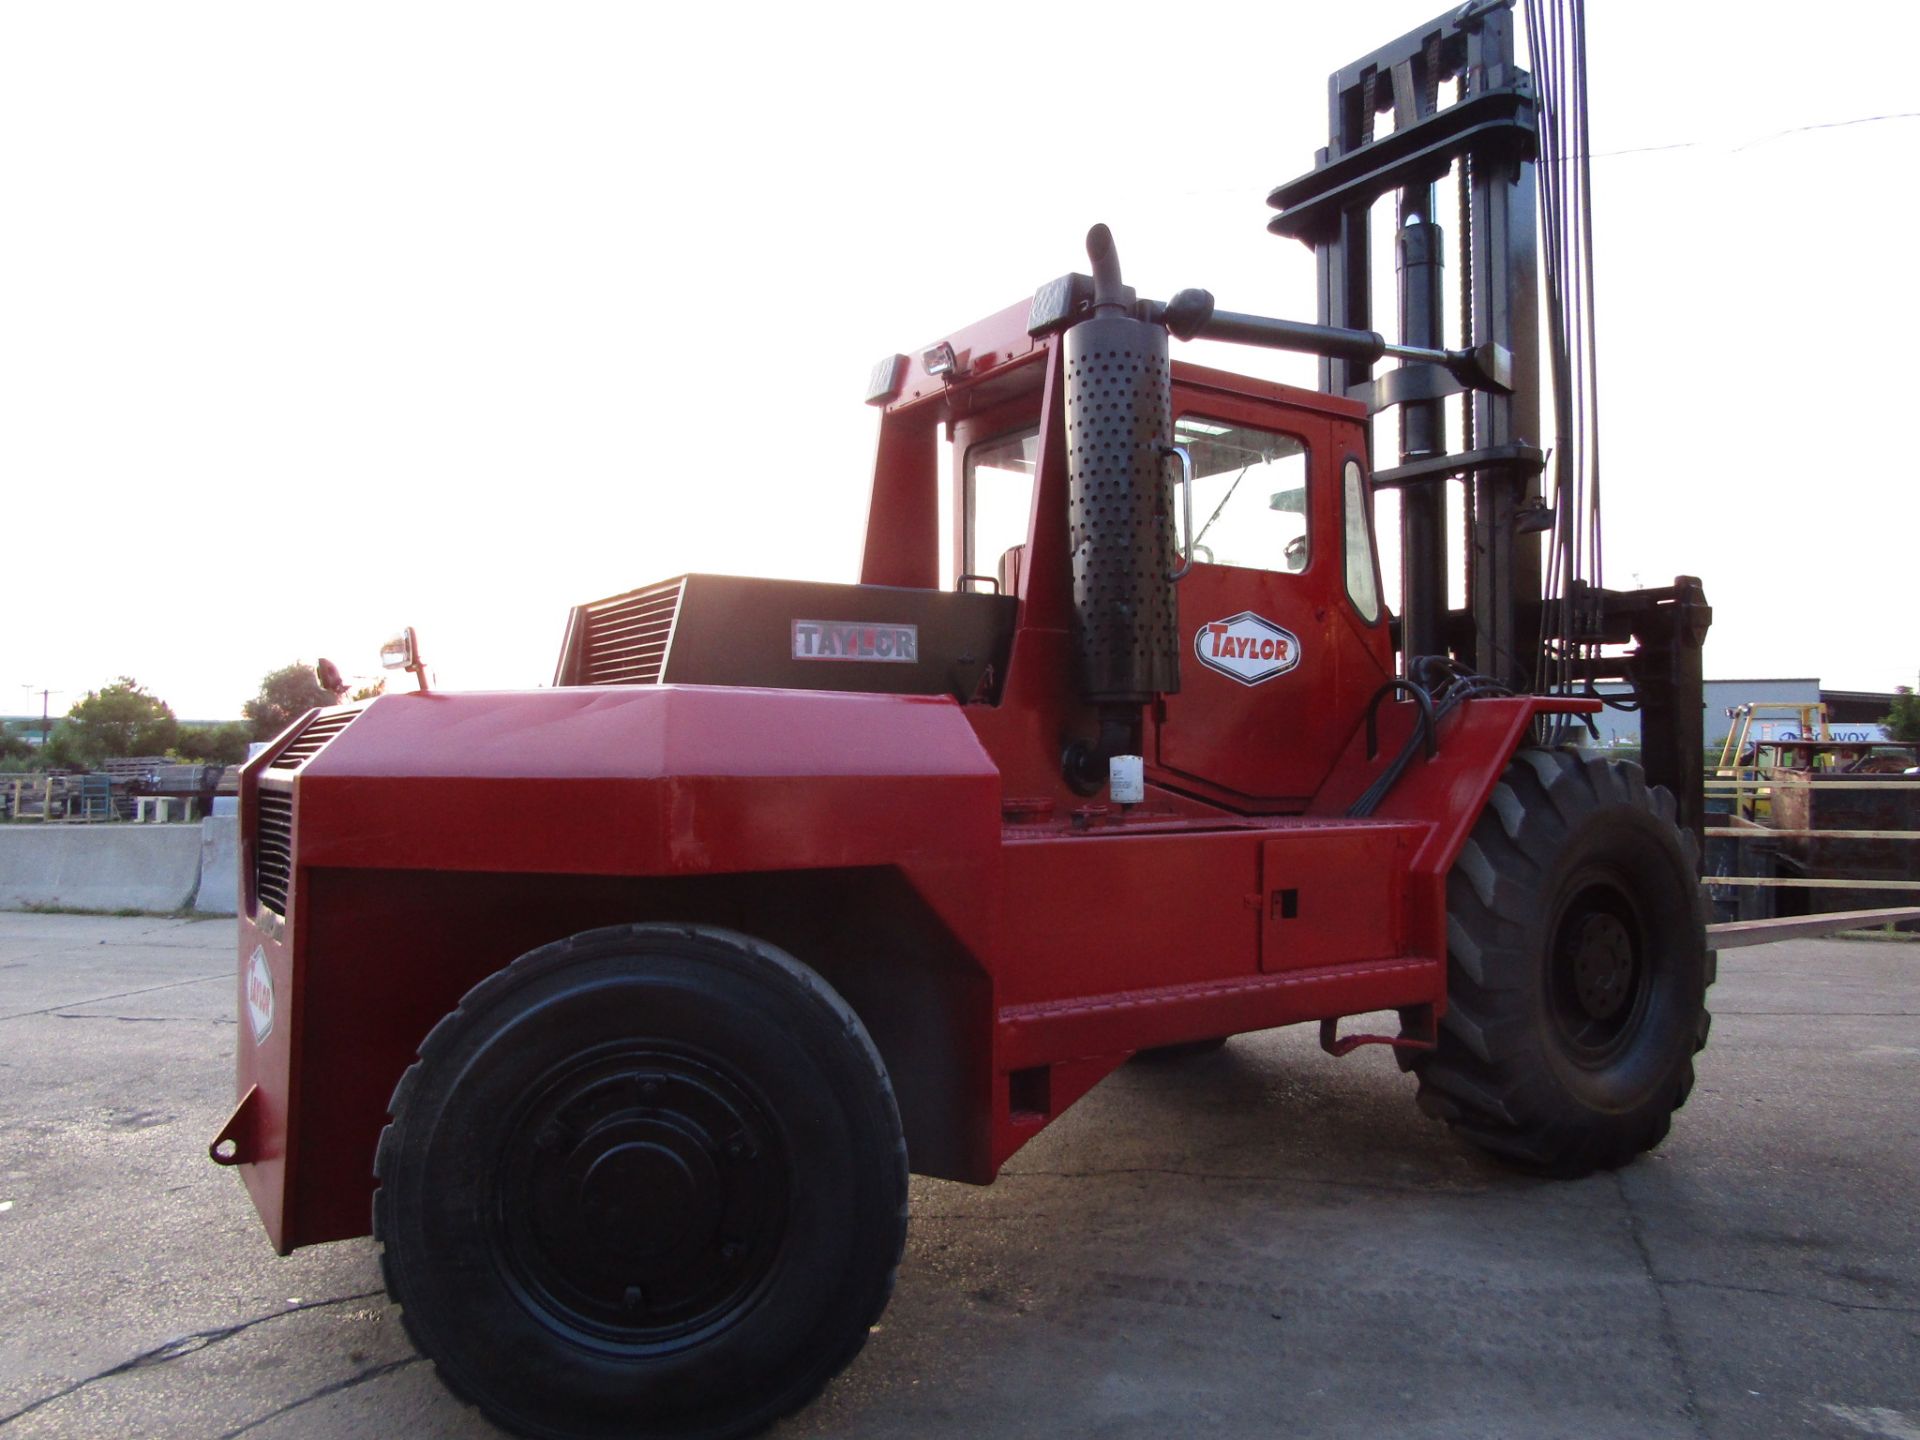 FREE CUSTOMS DOCS & 0 DUTY FEES - Taylor 22000lbs Capacity Forklift OUTDOOR Diesel Powered - Image 4 of 4